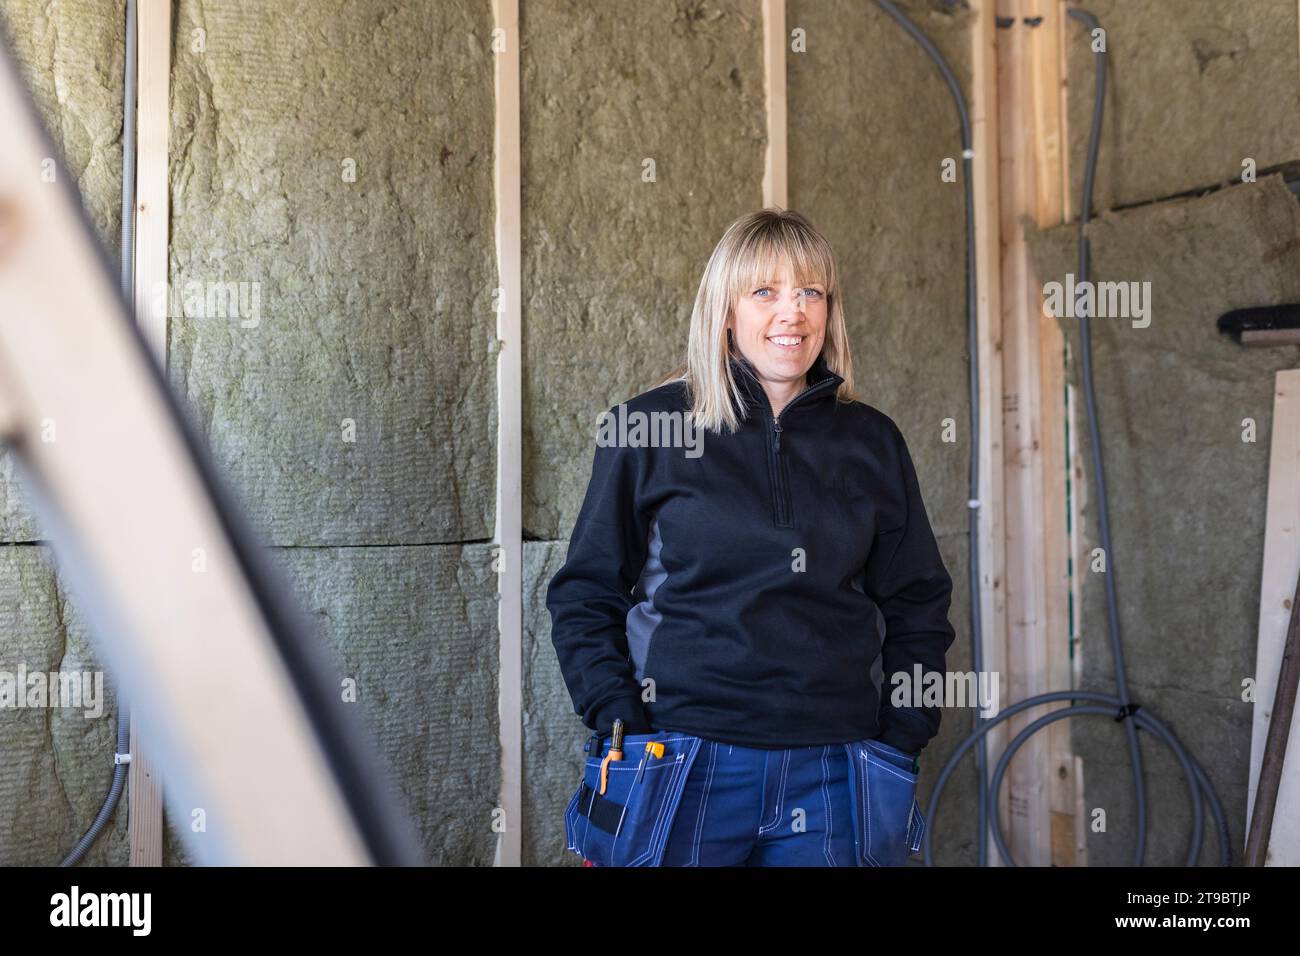 Smiling female blue-collar worker with hands in pockets standing against wall Stock Photo